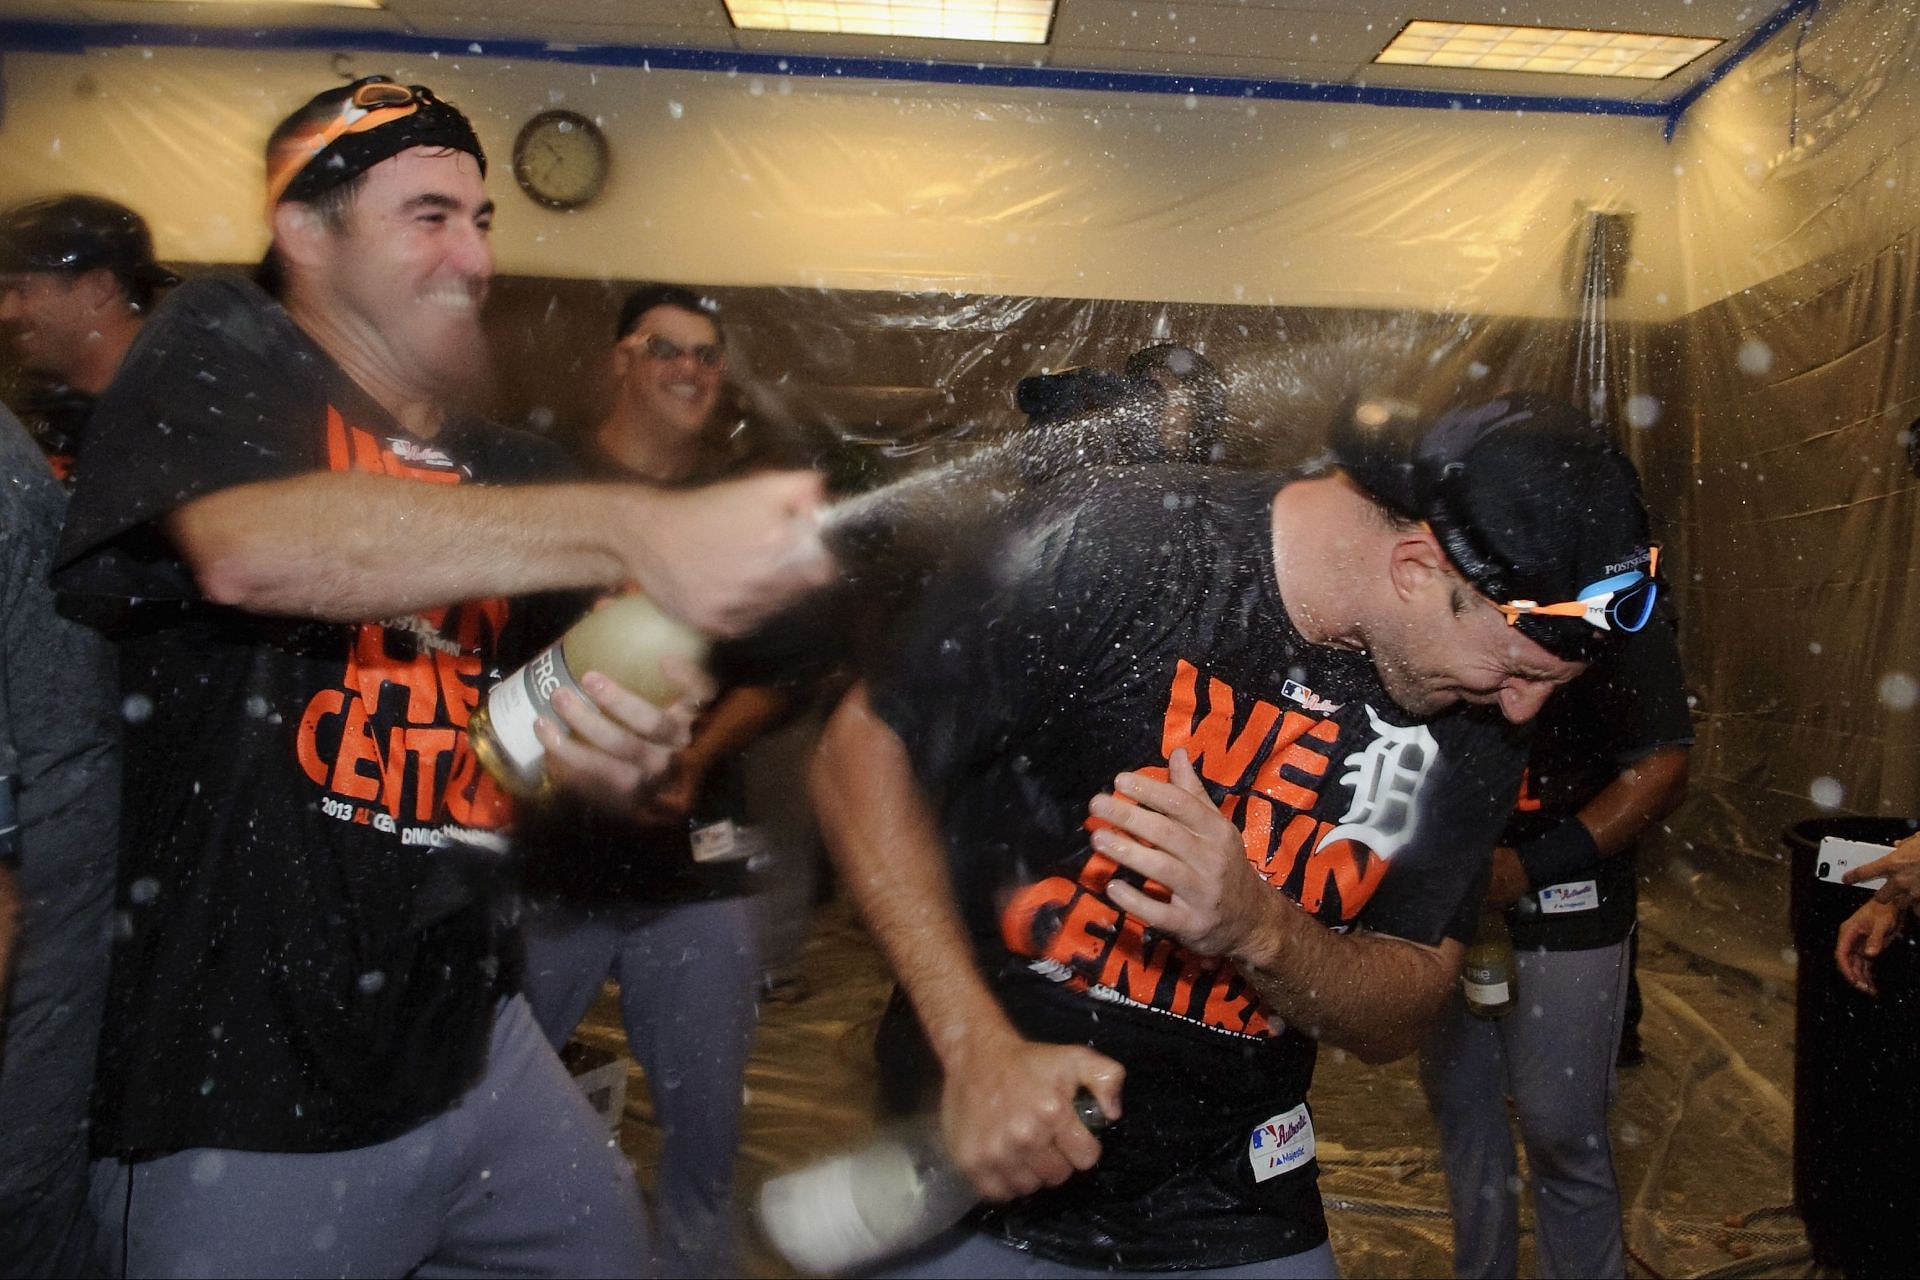 Justin Verlander #35 and Max Scherzer #37 of the Detroit Tigers celebrate with champagne in the clubhouse after a win against the Minnesota Twins on September 25, 2013 at Target Field in Minneapolis, Minnesota. The Tigers clinched the American League Central Division title with a 1-0 win over the Twins